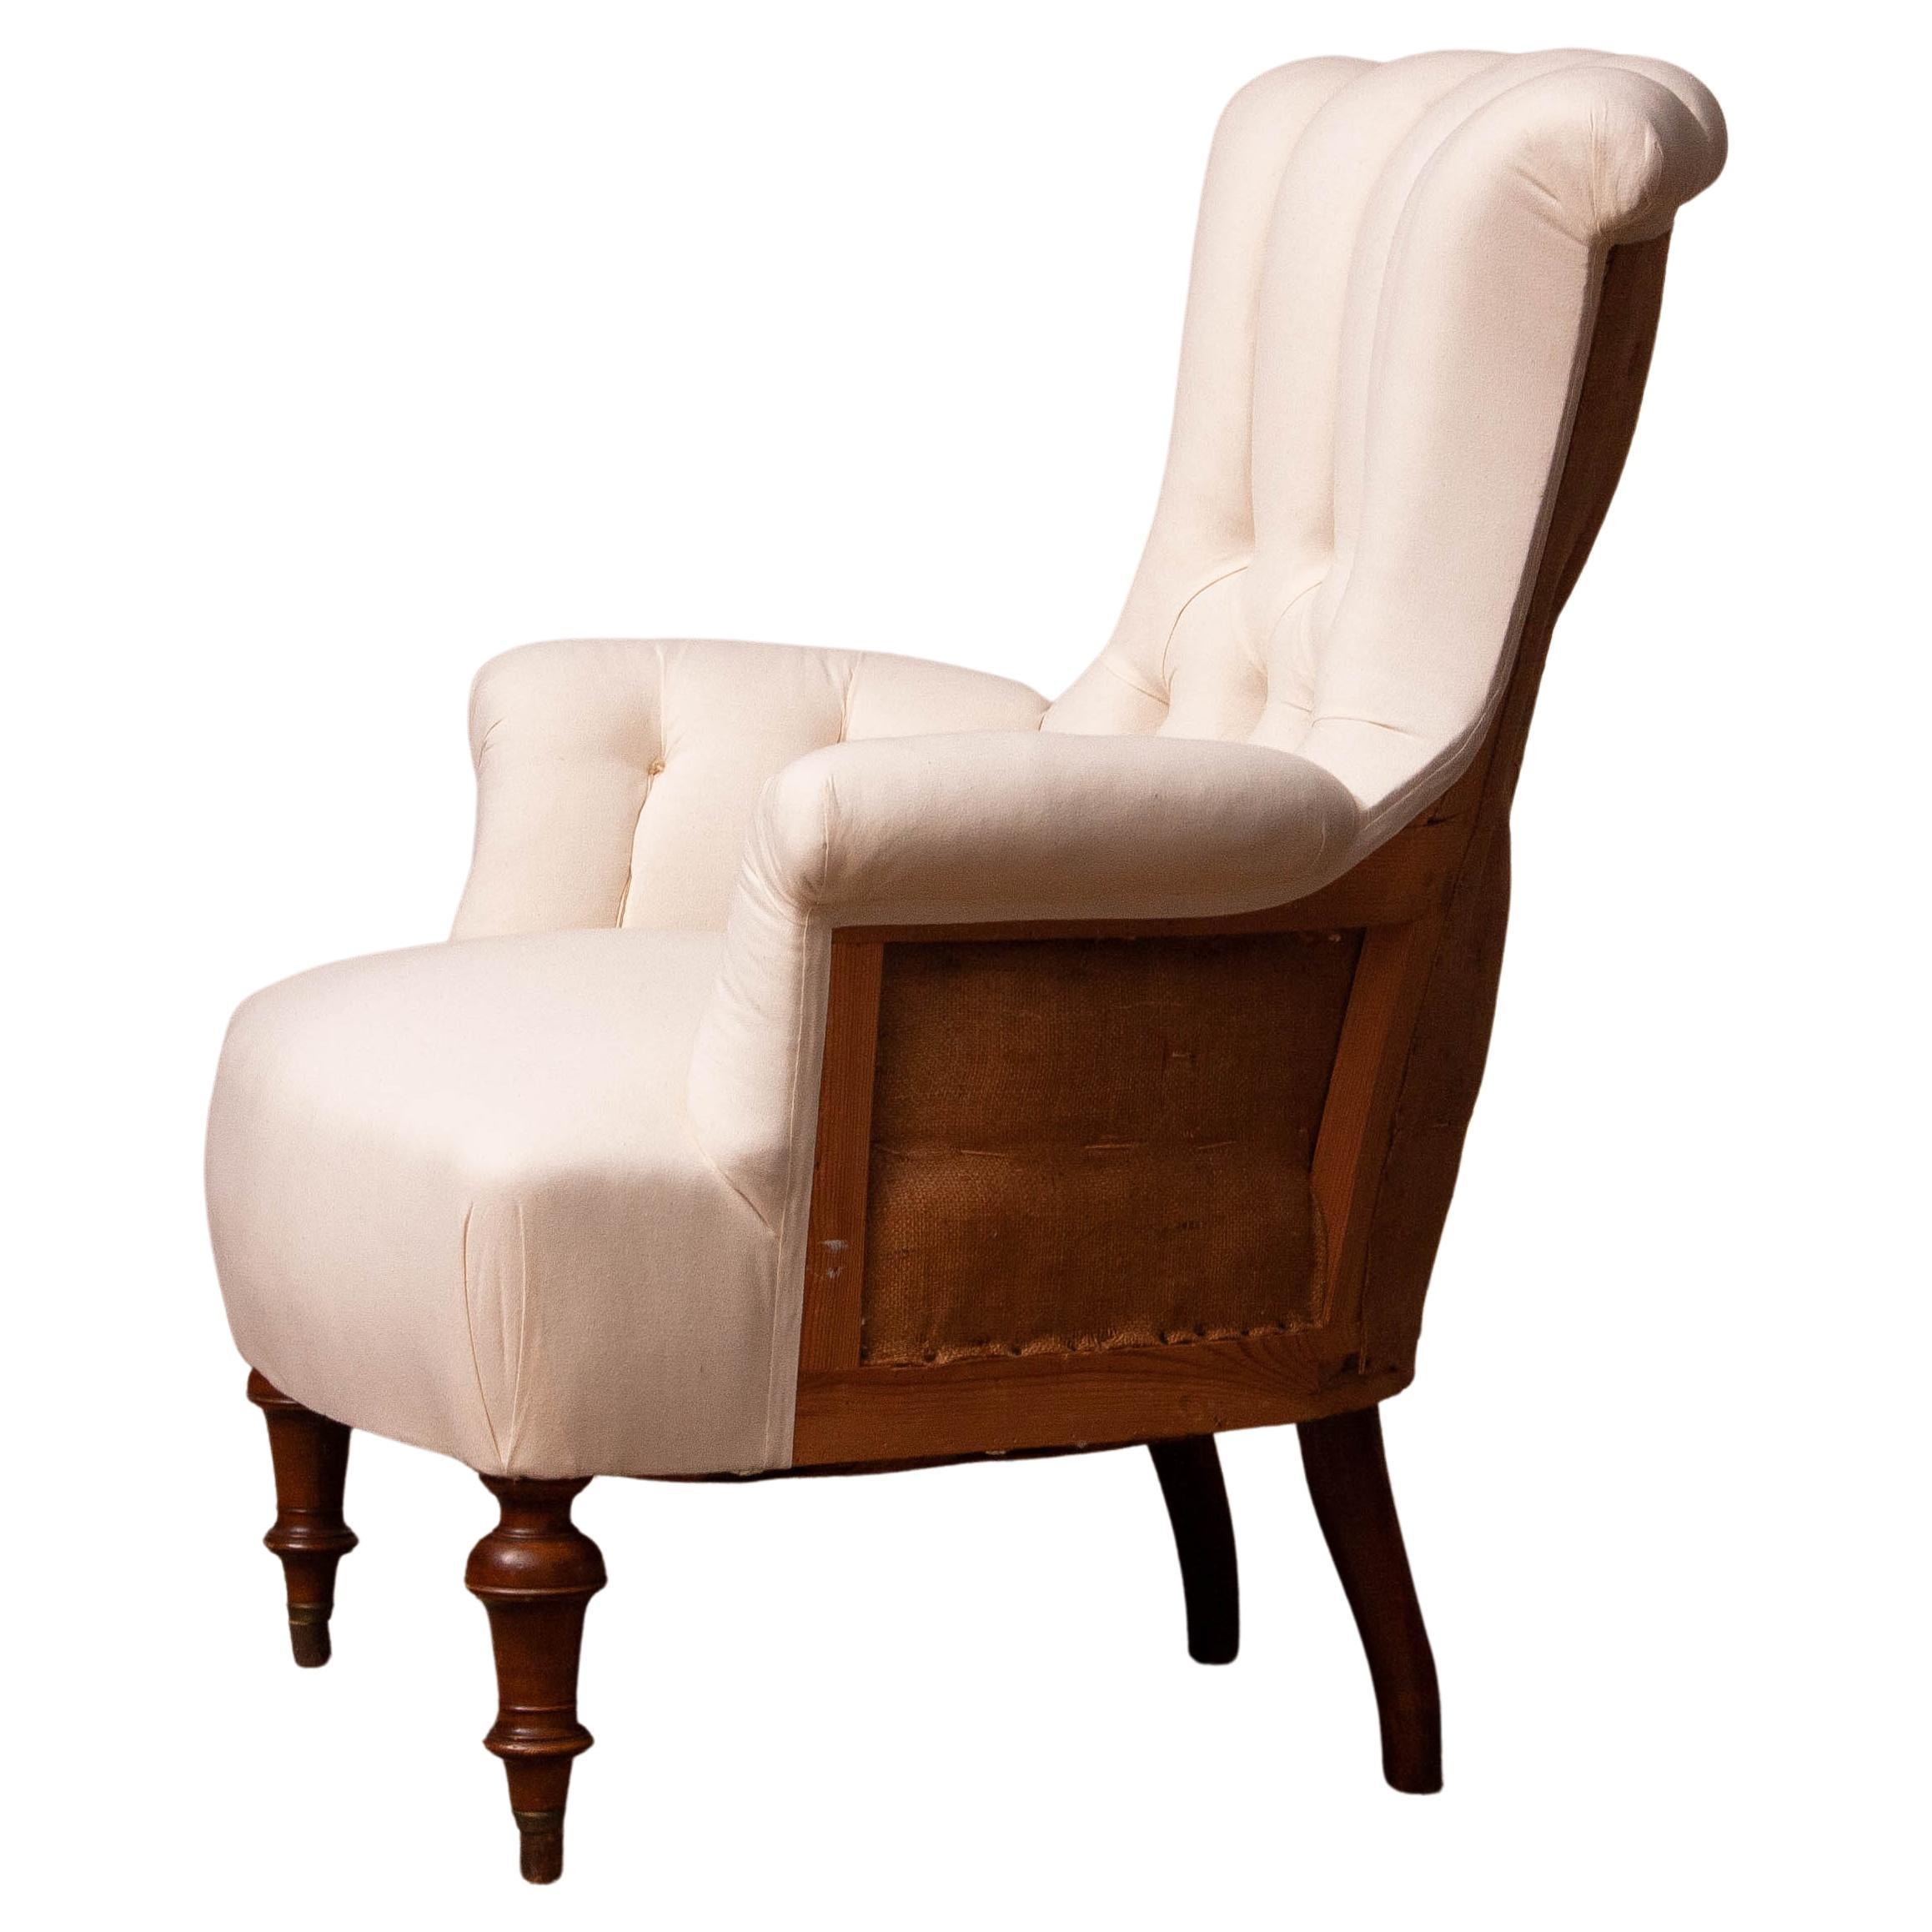 19th Century White Cotton Victorian 'Deconstructed' Tufted Scroll-Back Chair For Sale